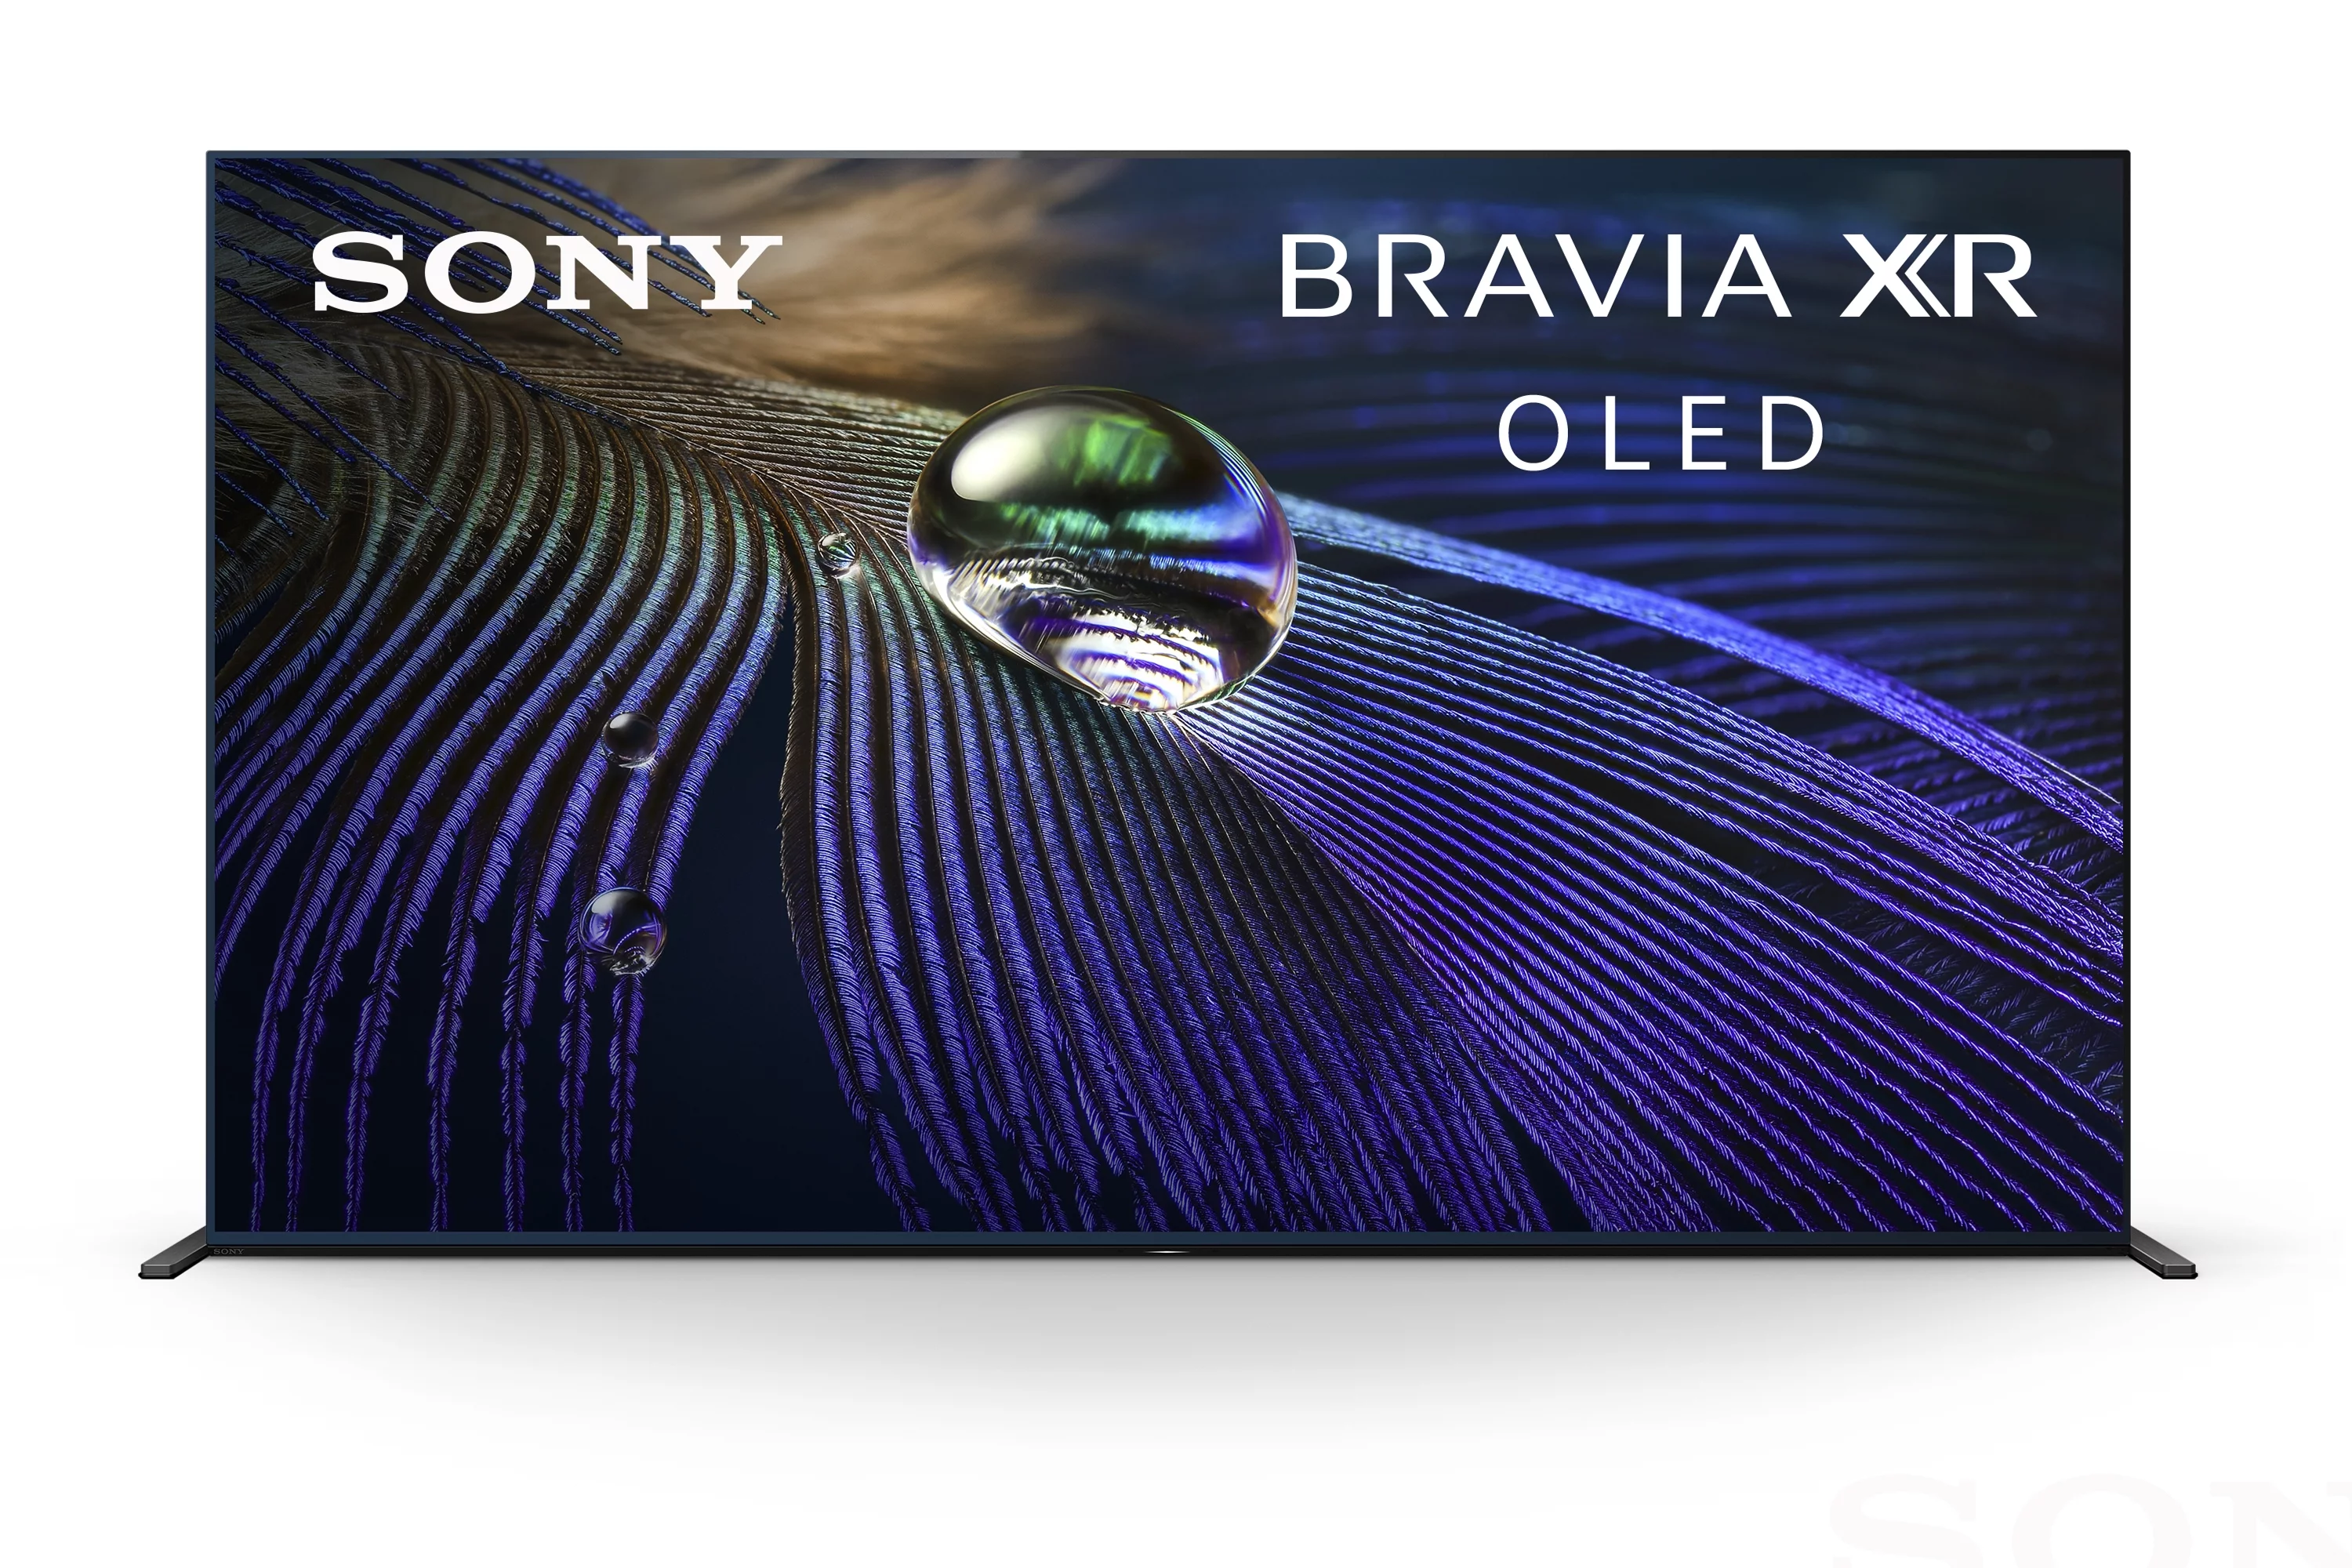 Sony XR65A90J 65" A90J Series BRAVIA XR OLED 4K UHD Smart TV with Dolby Vision HDR (2021)